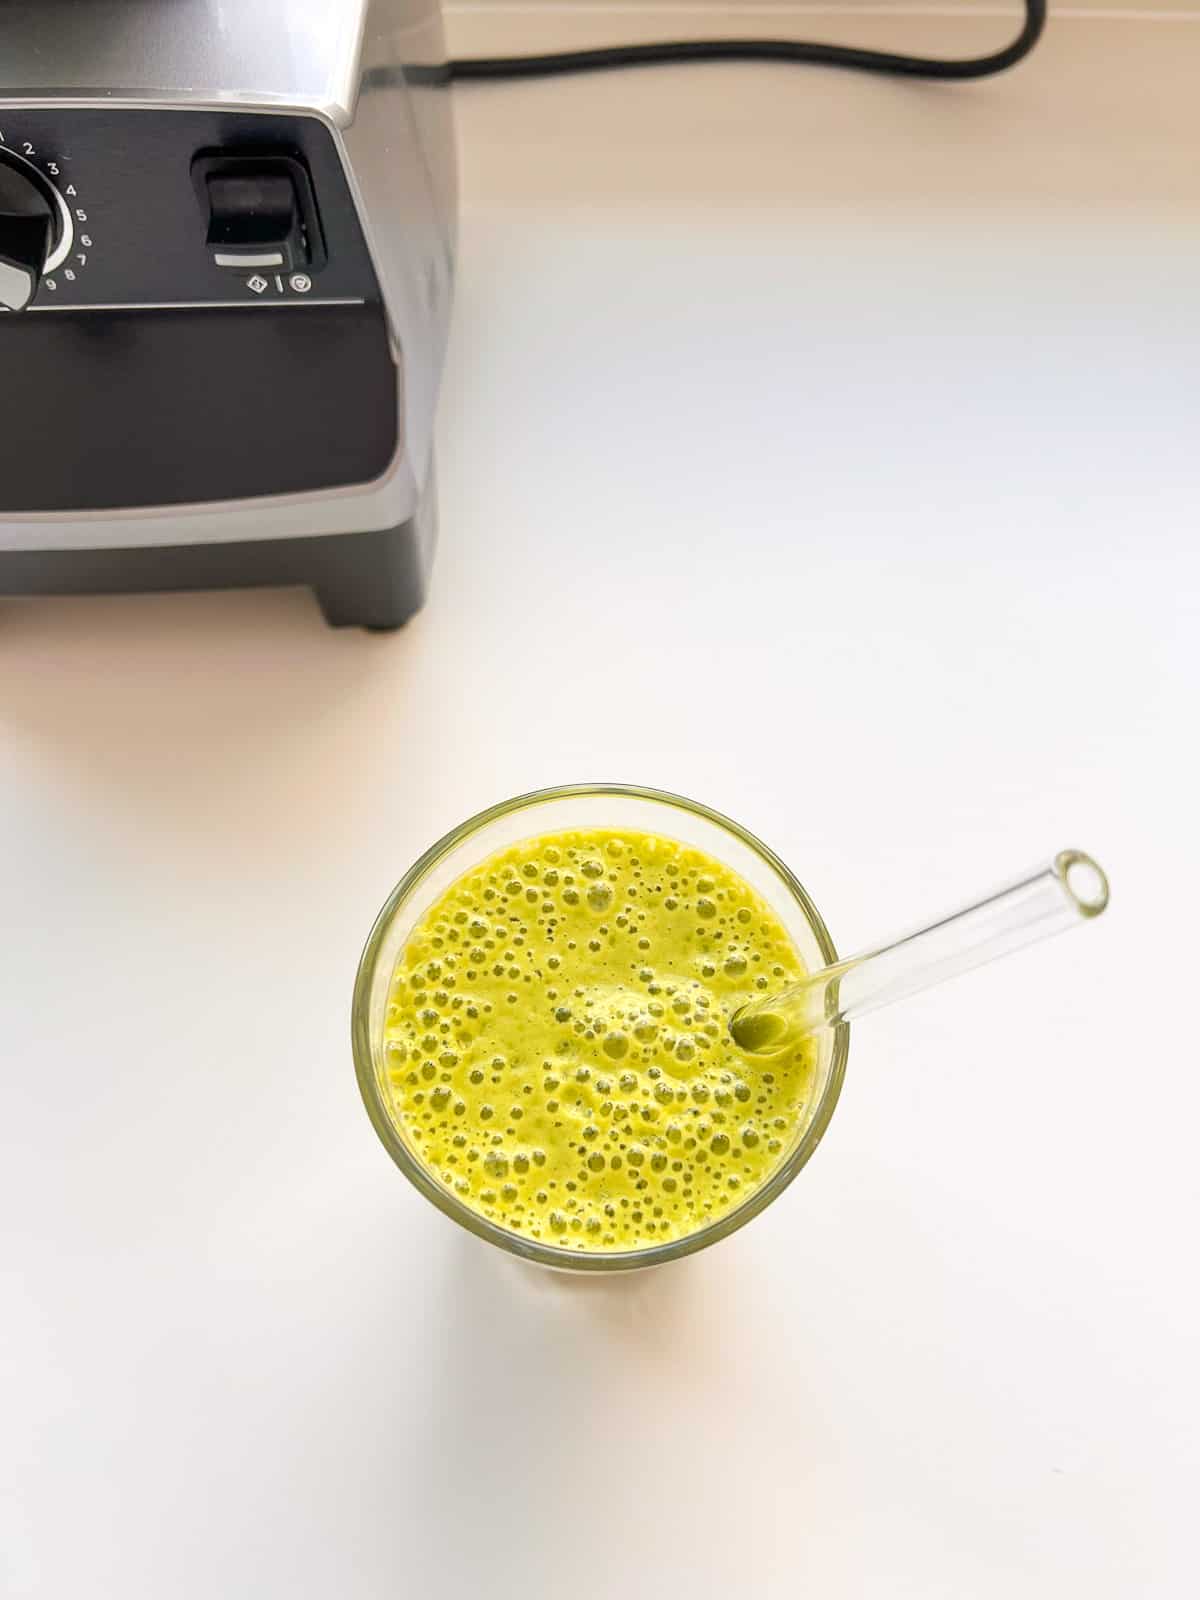 An image of a green smoothie on a white counter with the blender in the background.